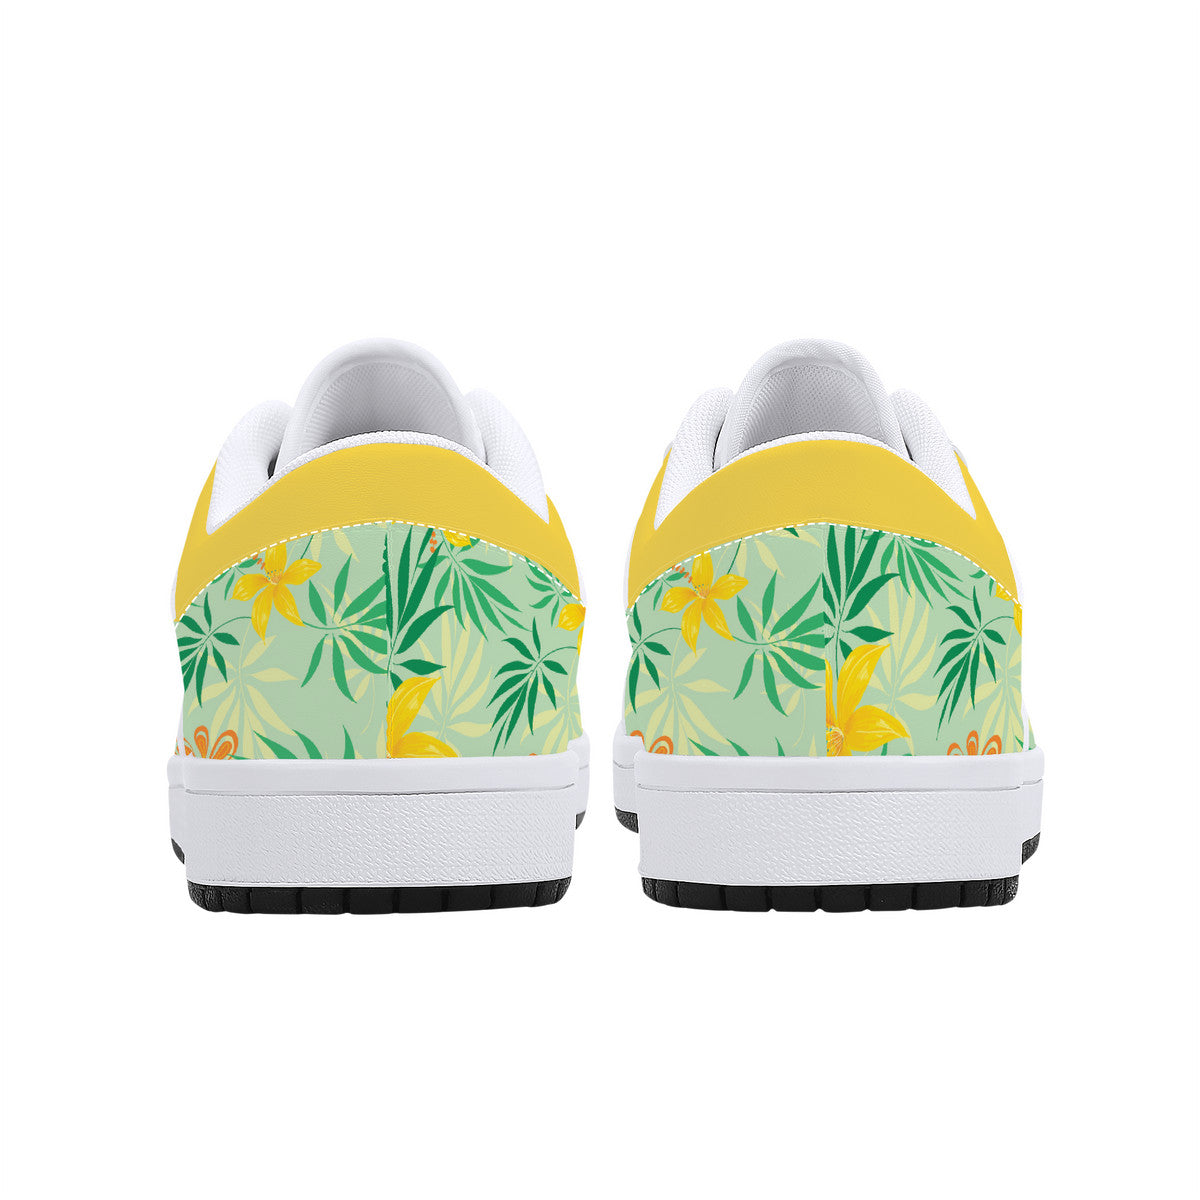 Leather Sneakers - Yellow Spring Flowers